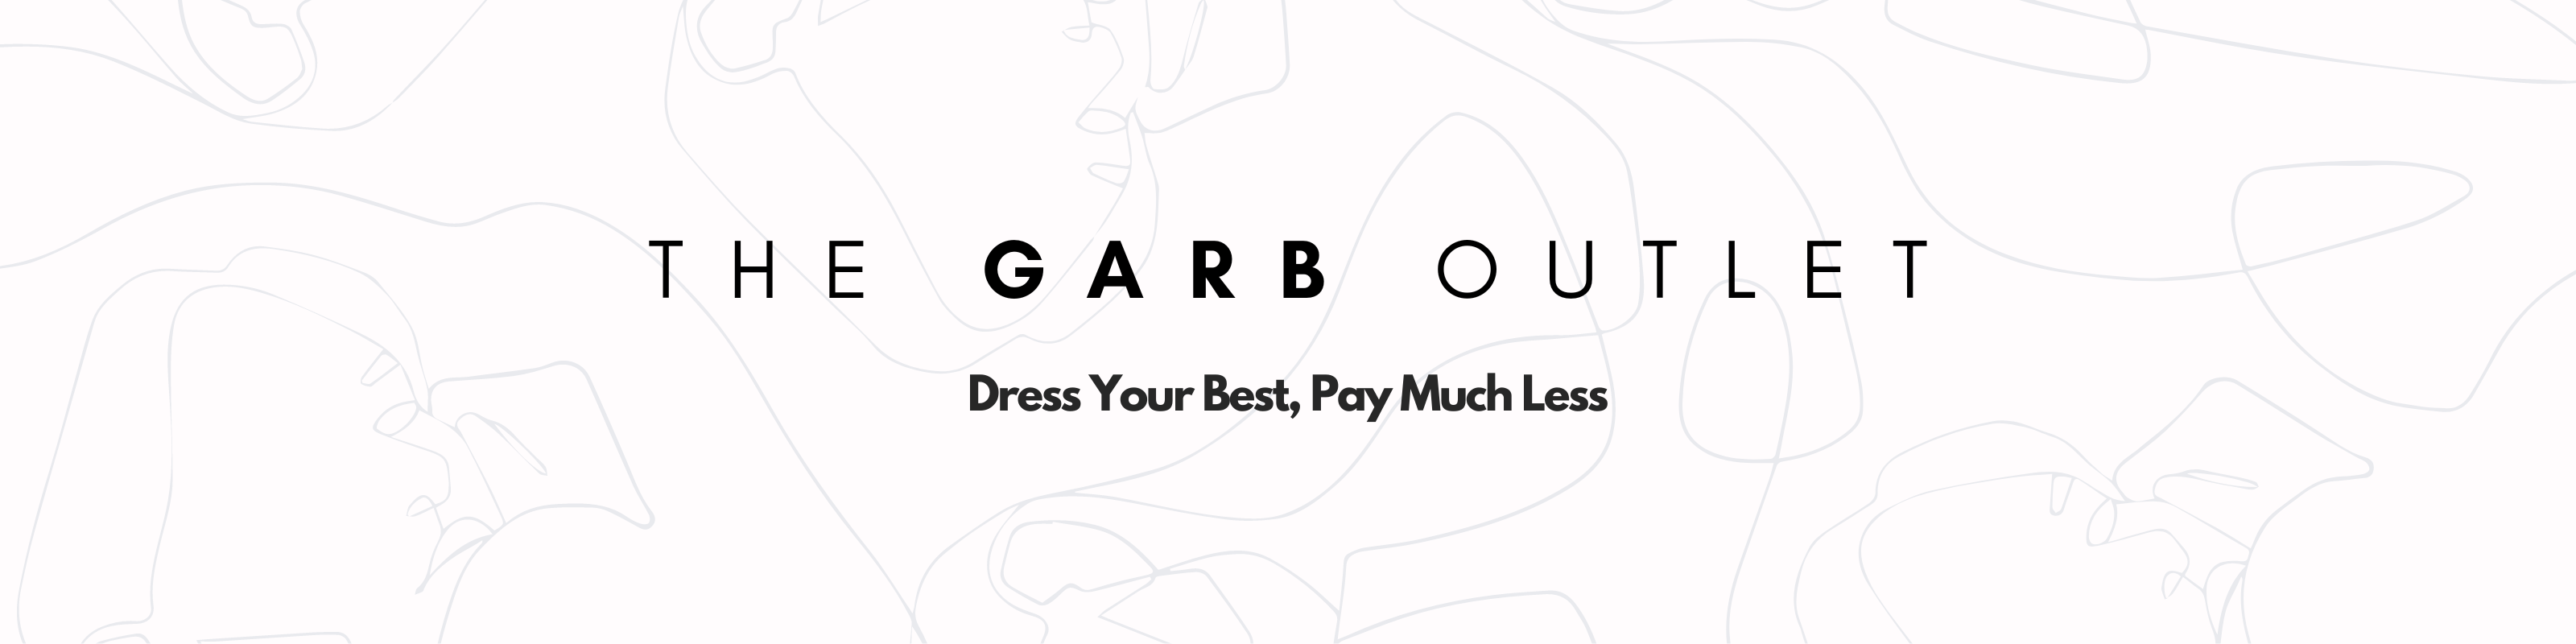 The Garb Outlet